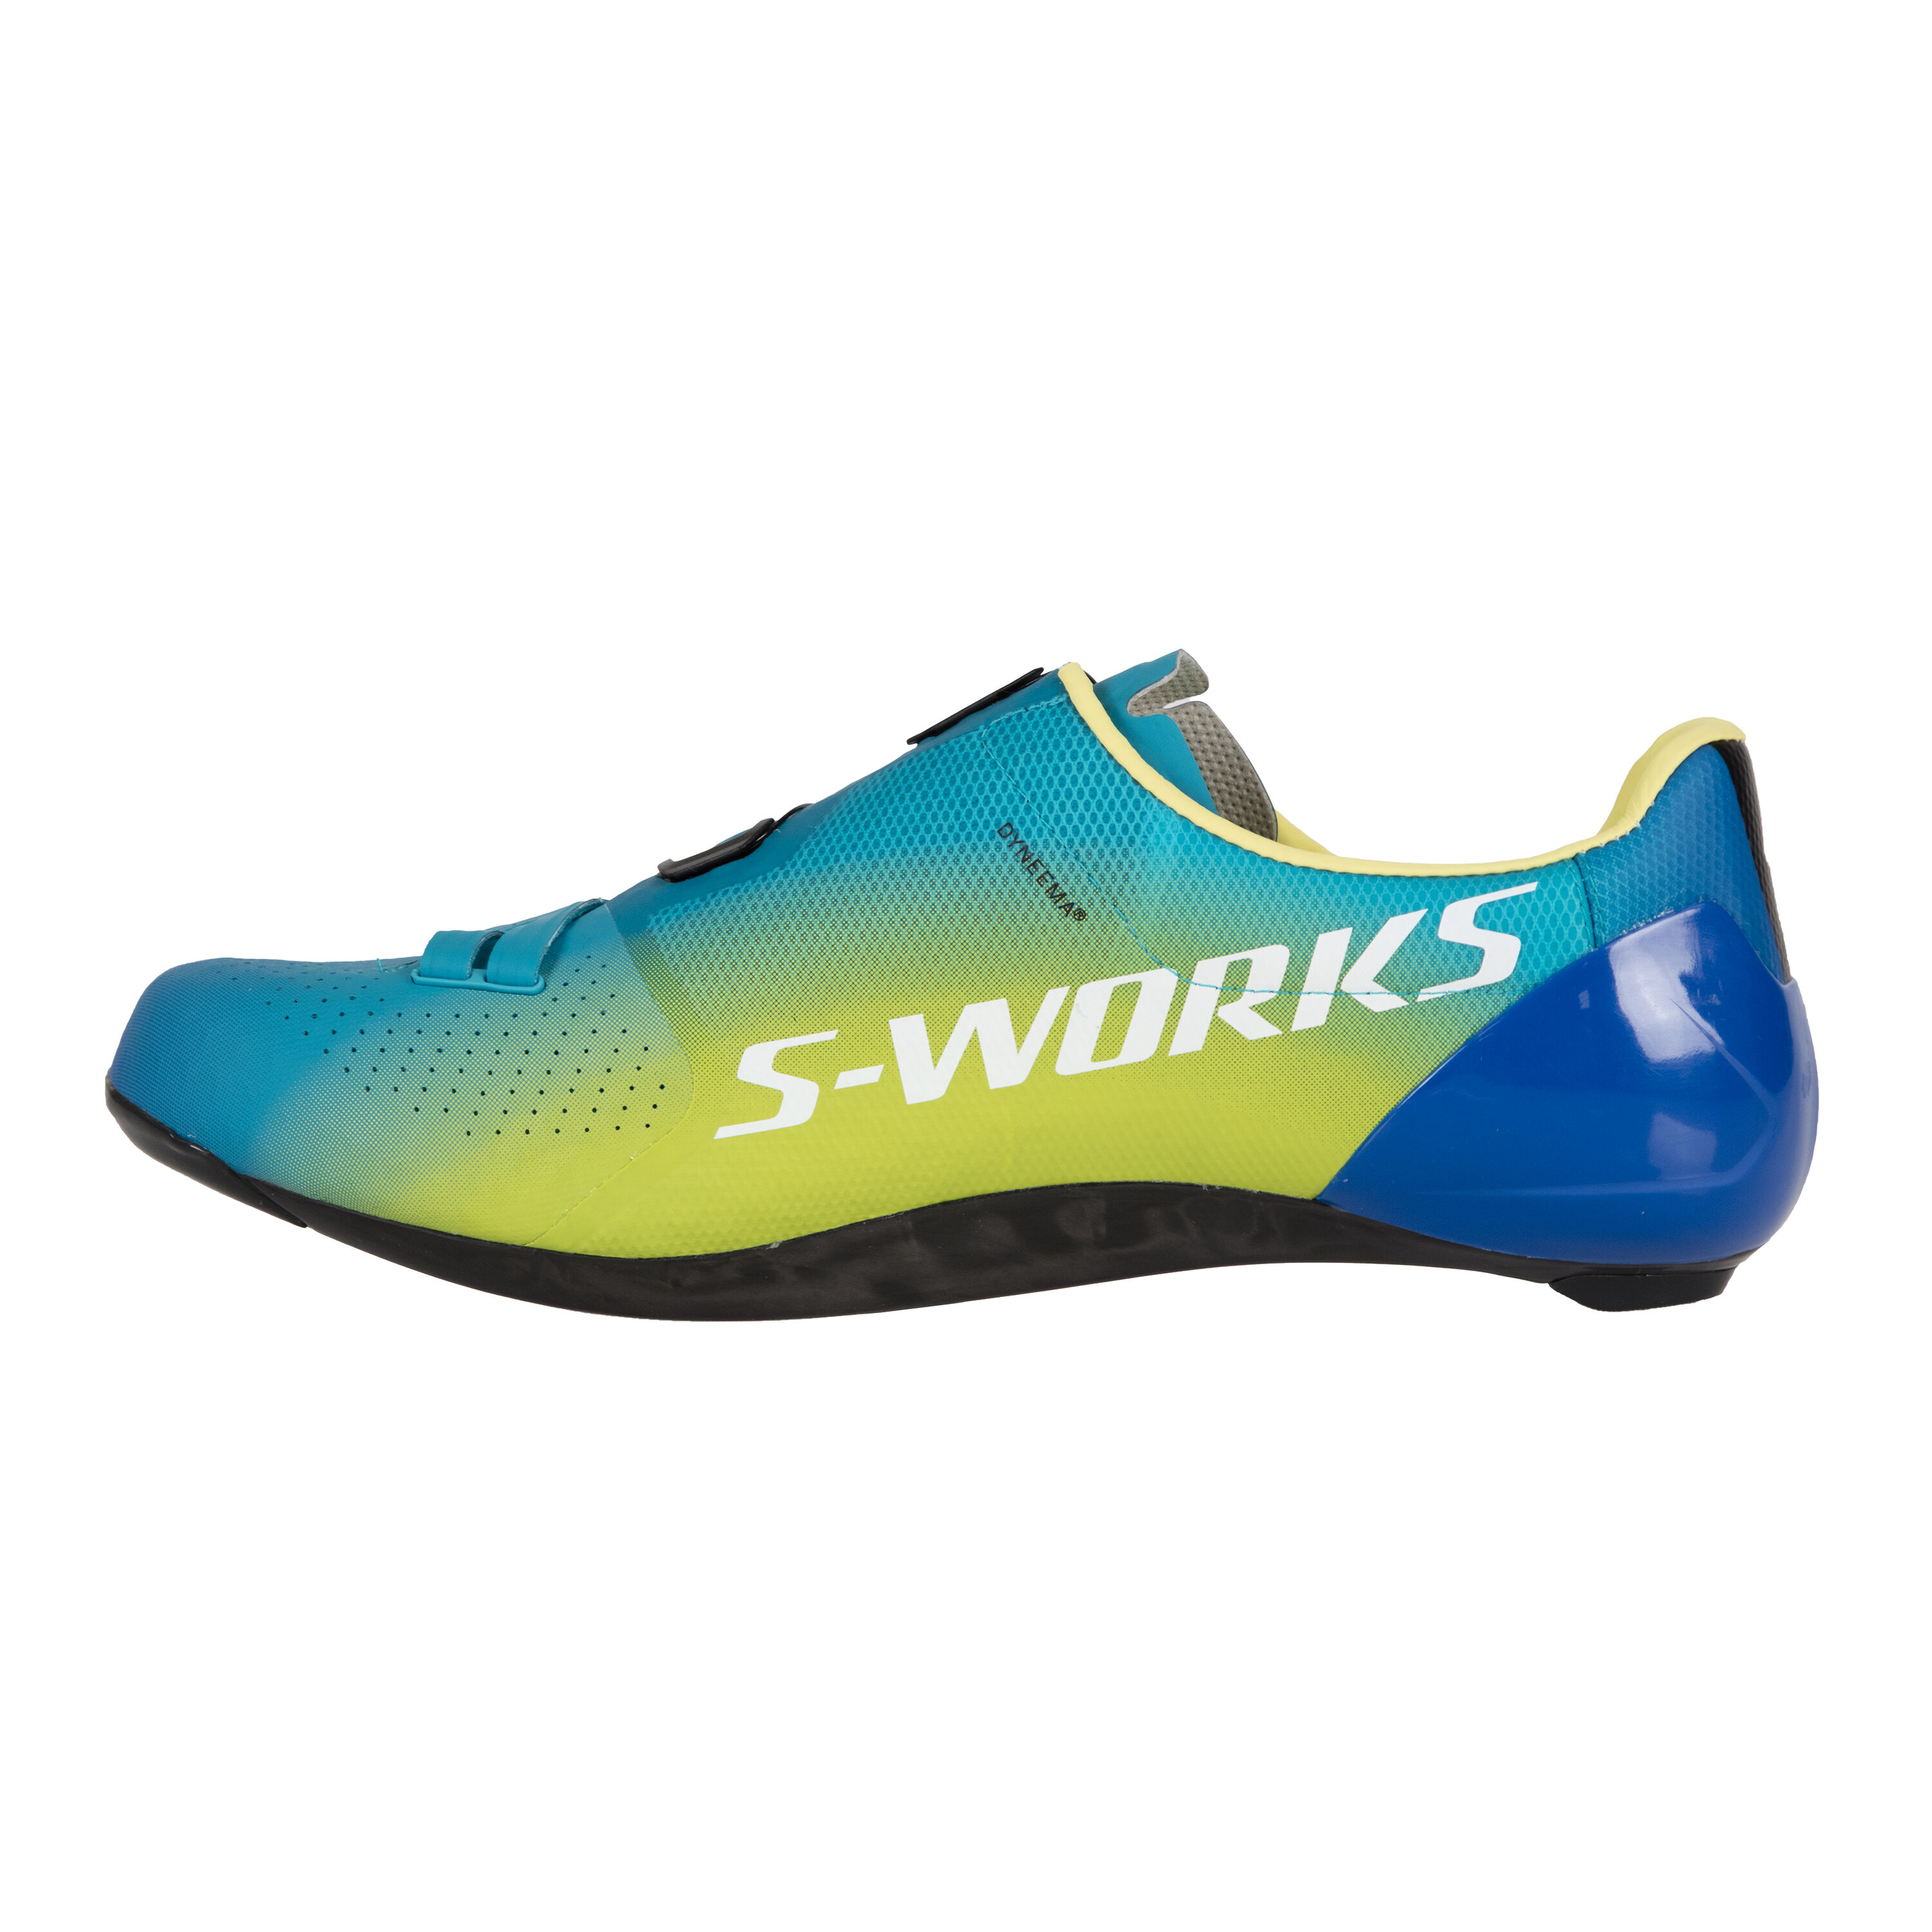 s works tour down under shoes